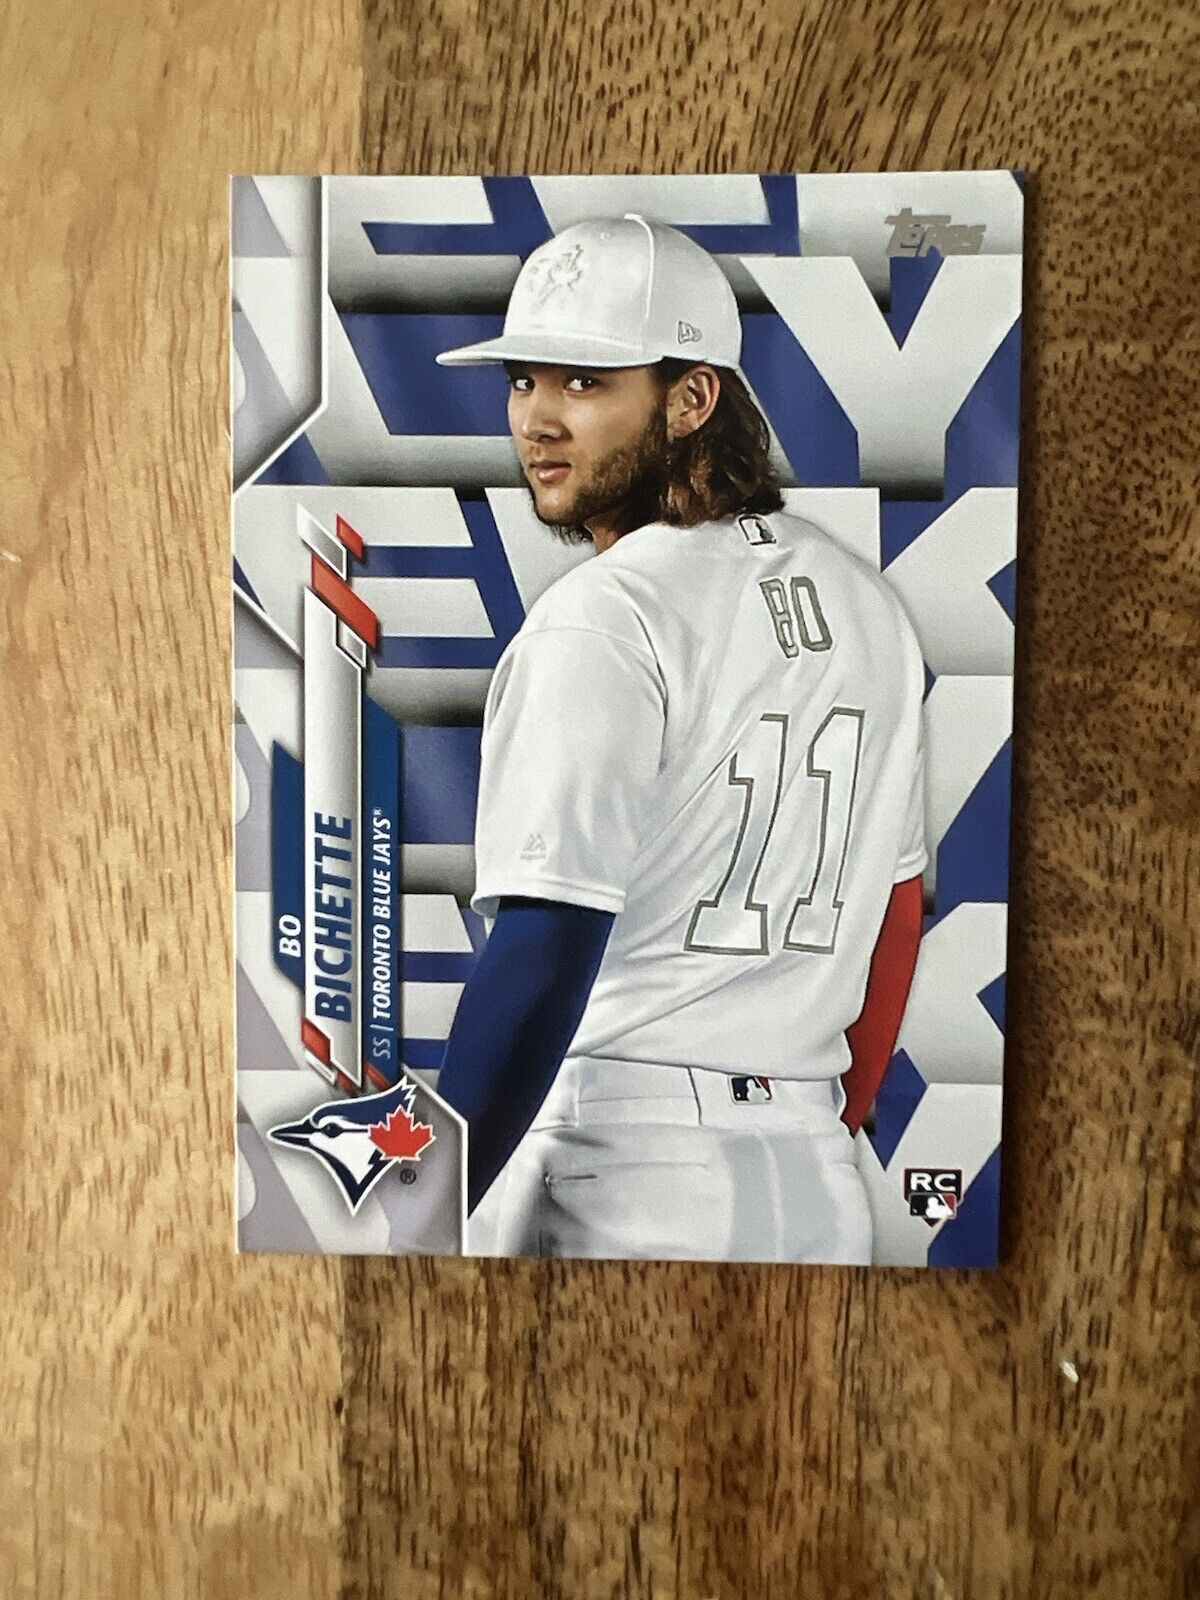 2020 Topps Series 1 Bo Bichette #78 Players Weekend Photo Image Variation SP RC